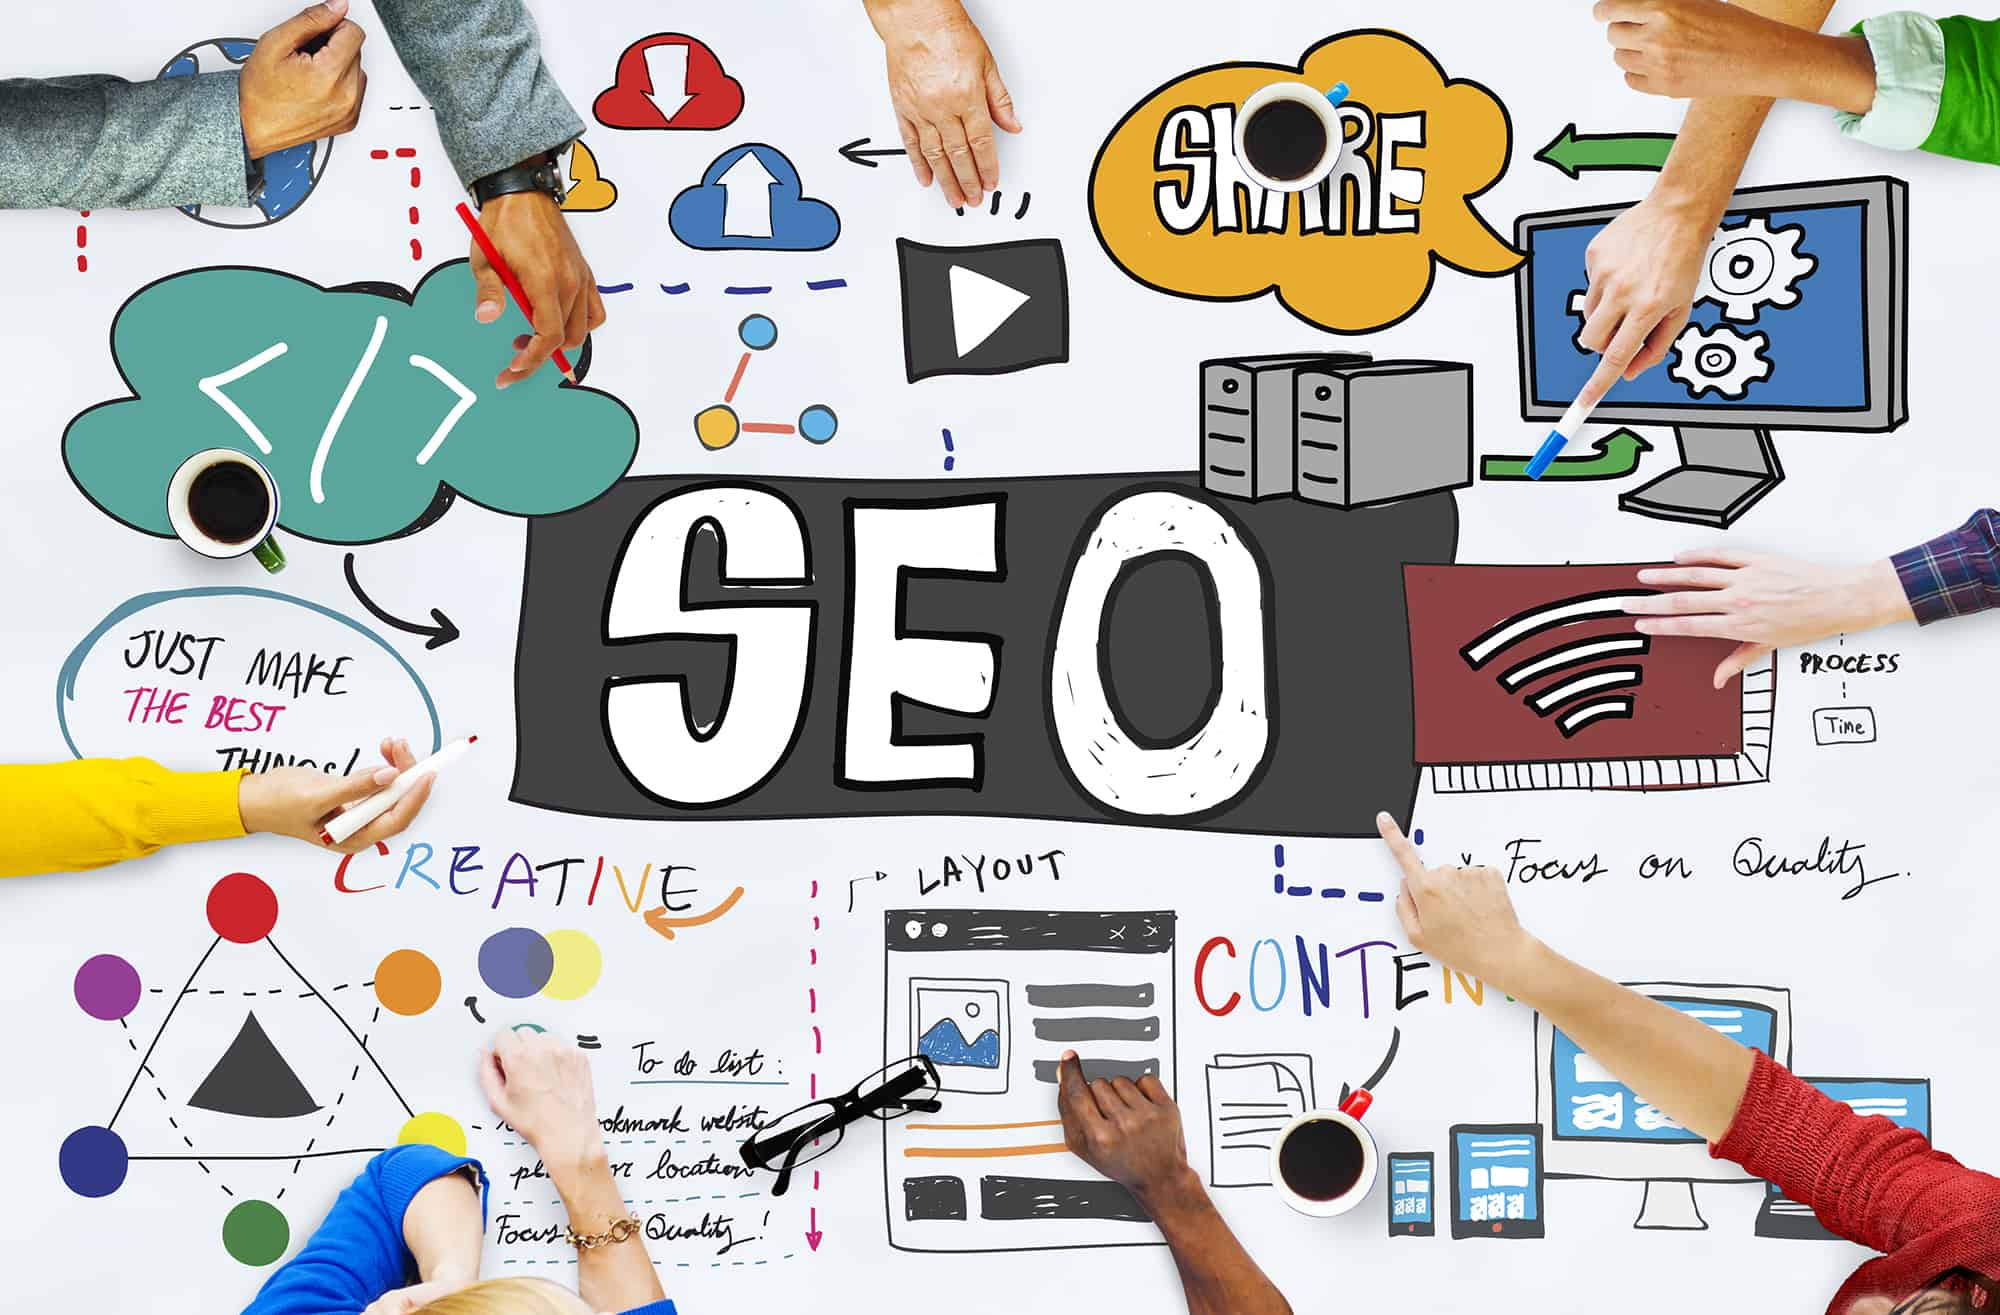 Image of multiple people drawing on a board with the word “SEO” in the center